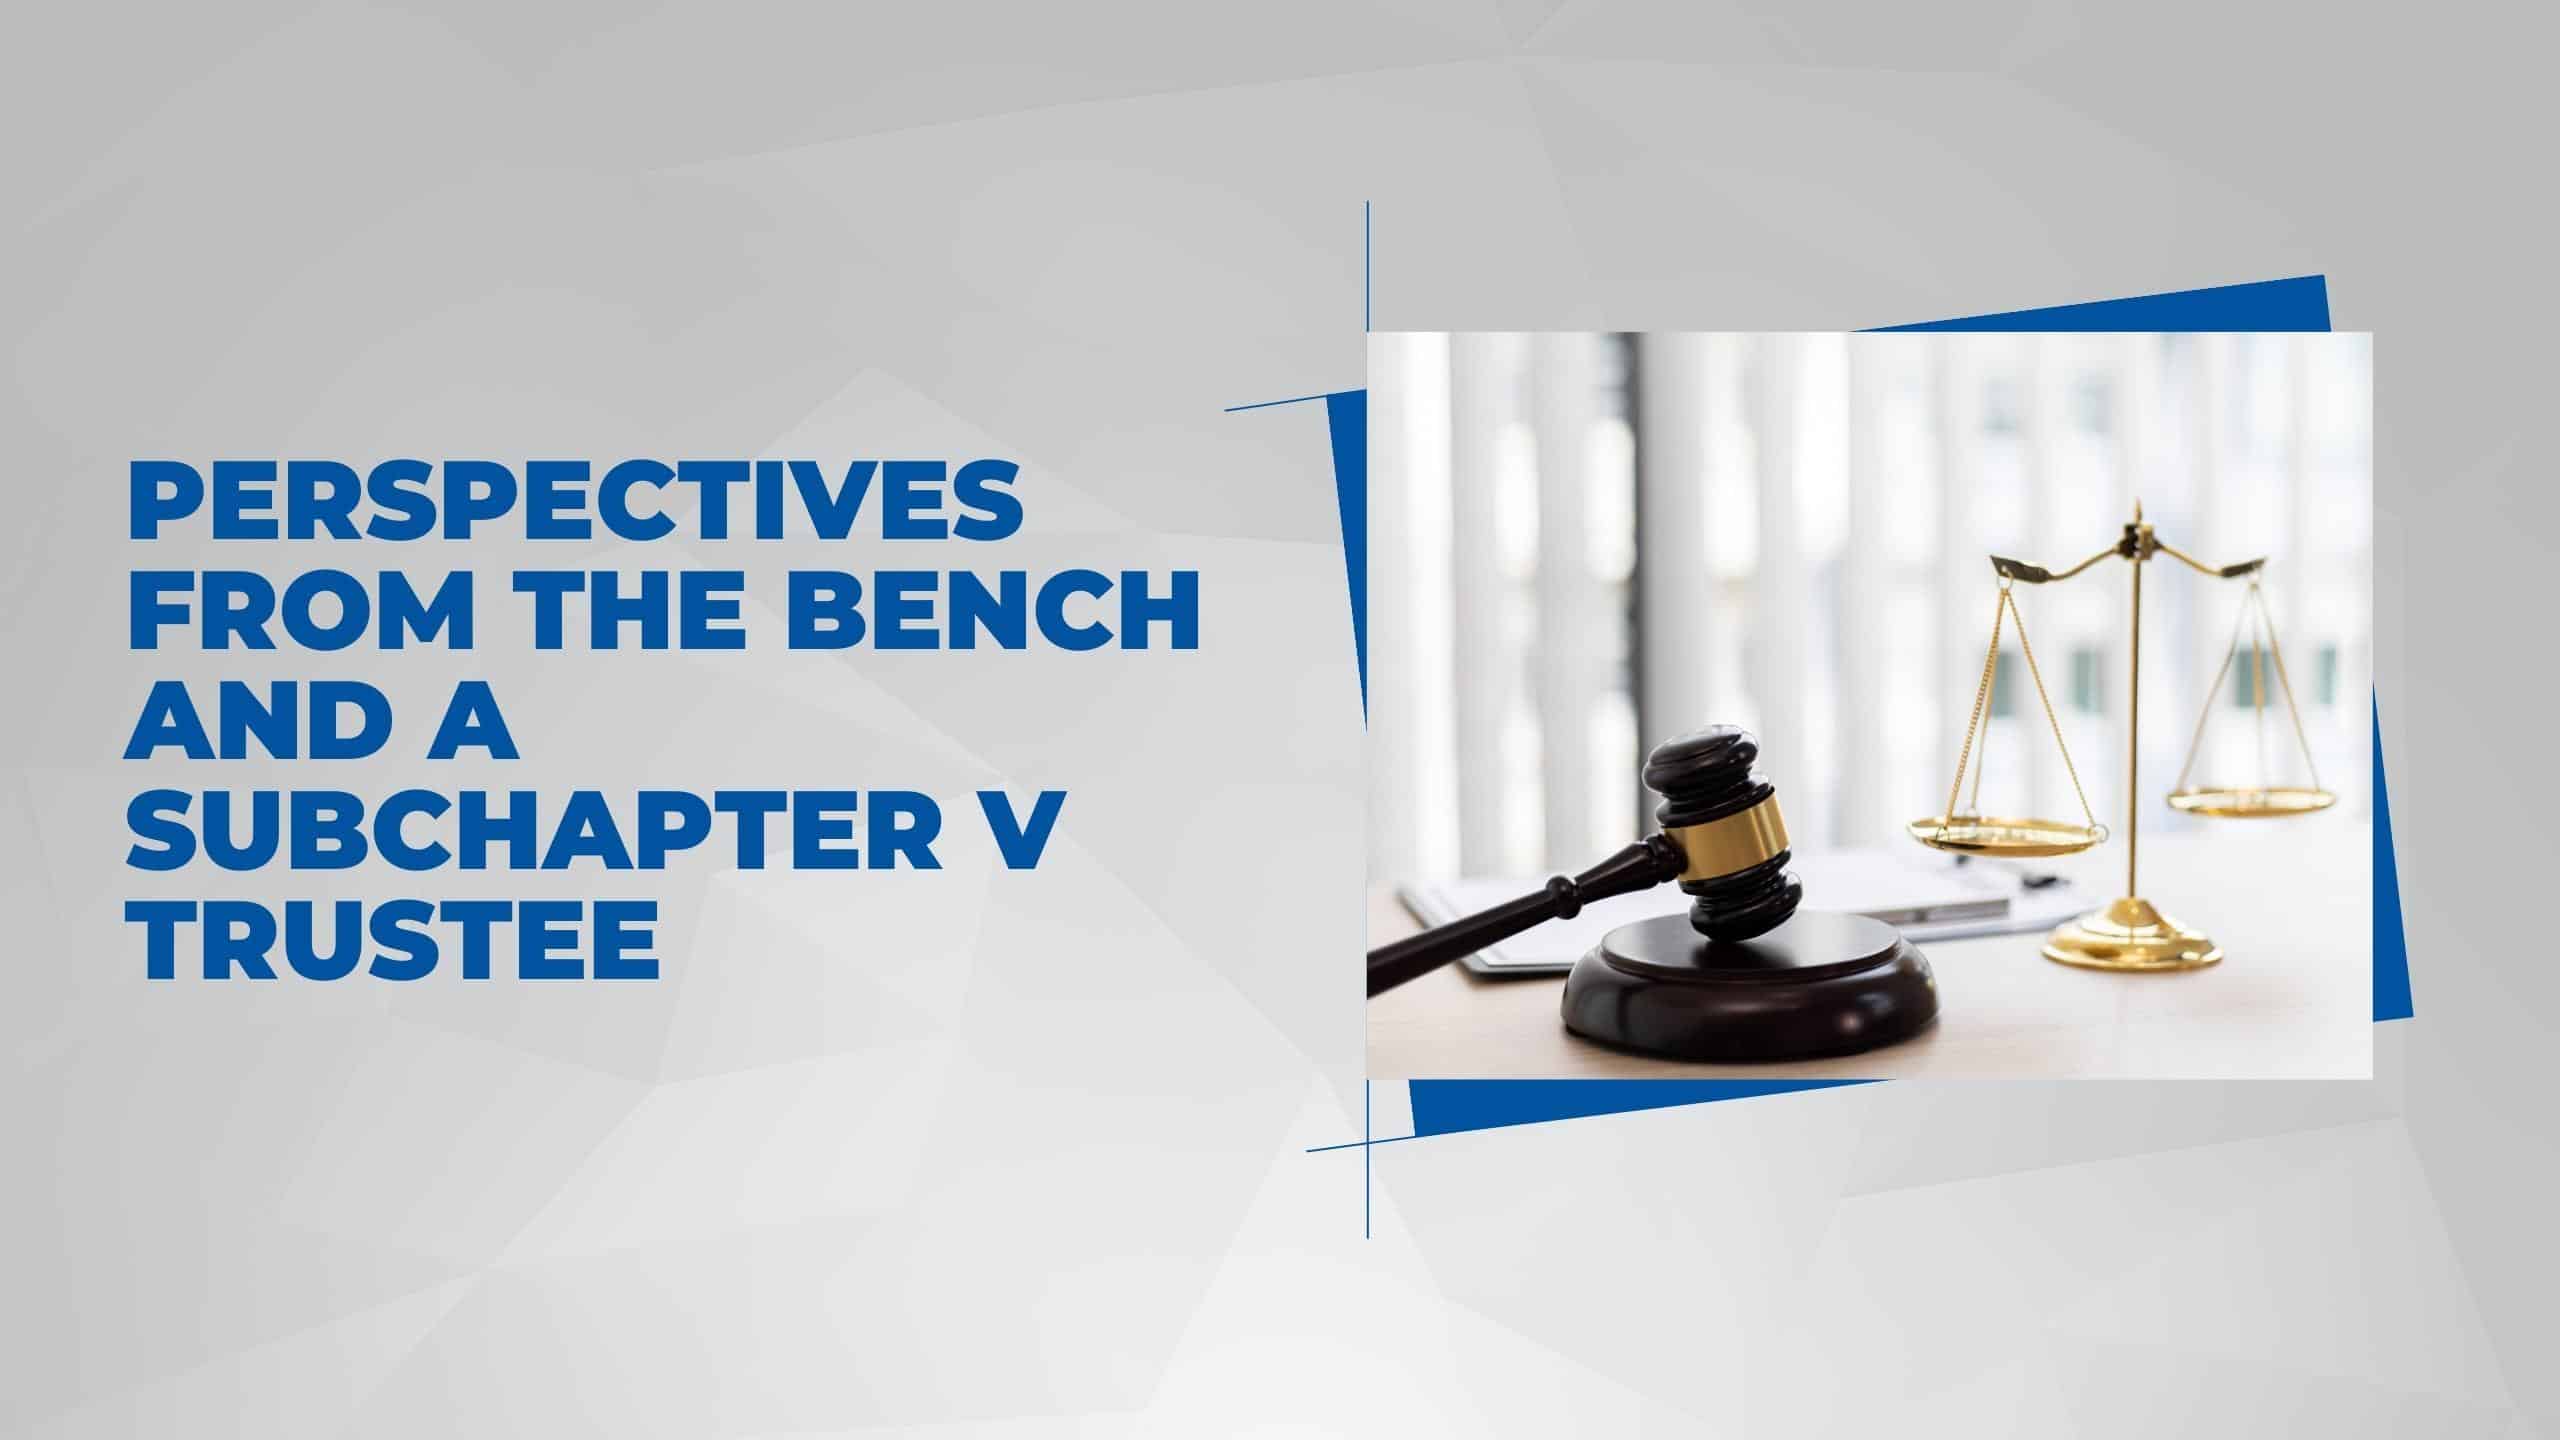 Perspectives from the Bench and a Subchapter V Trustee